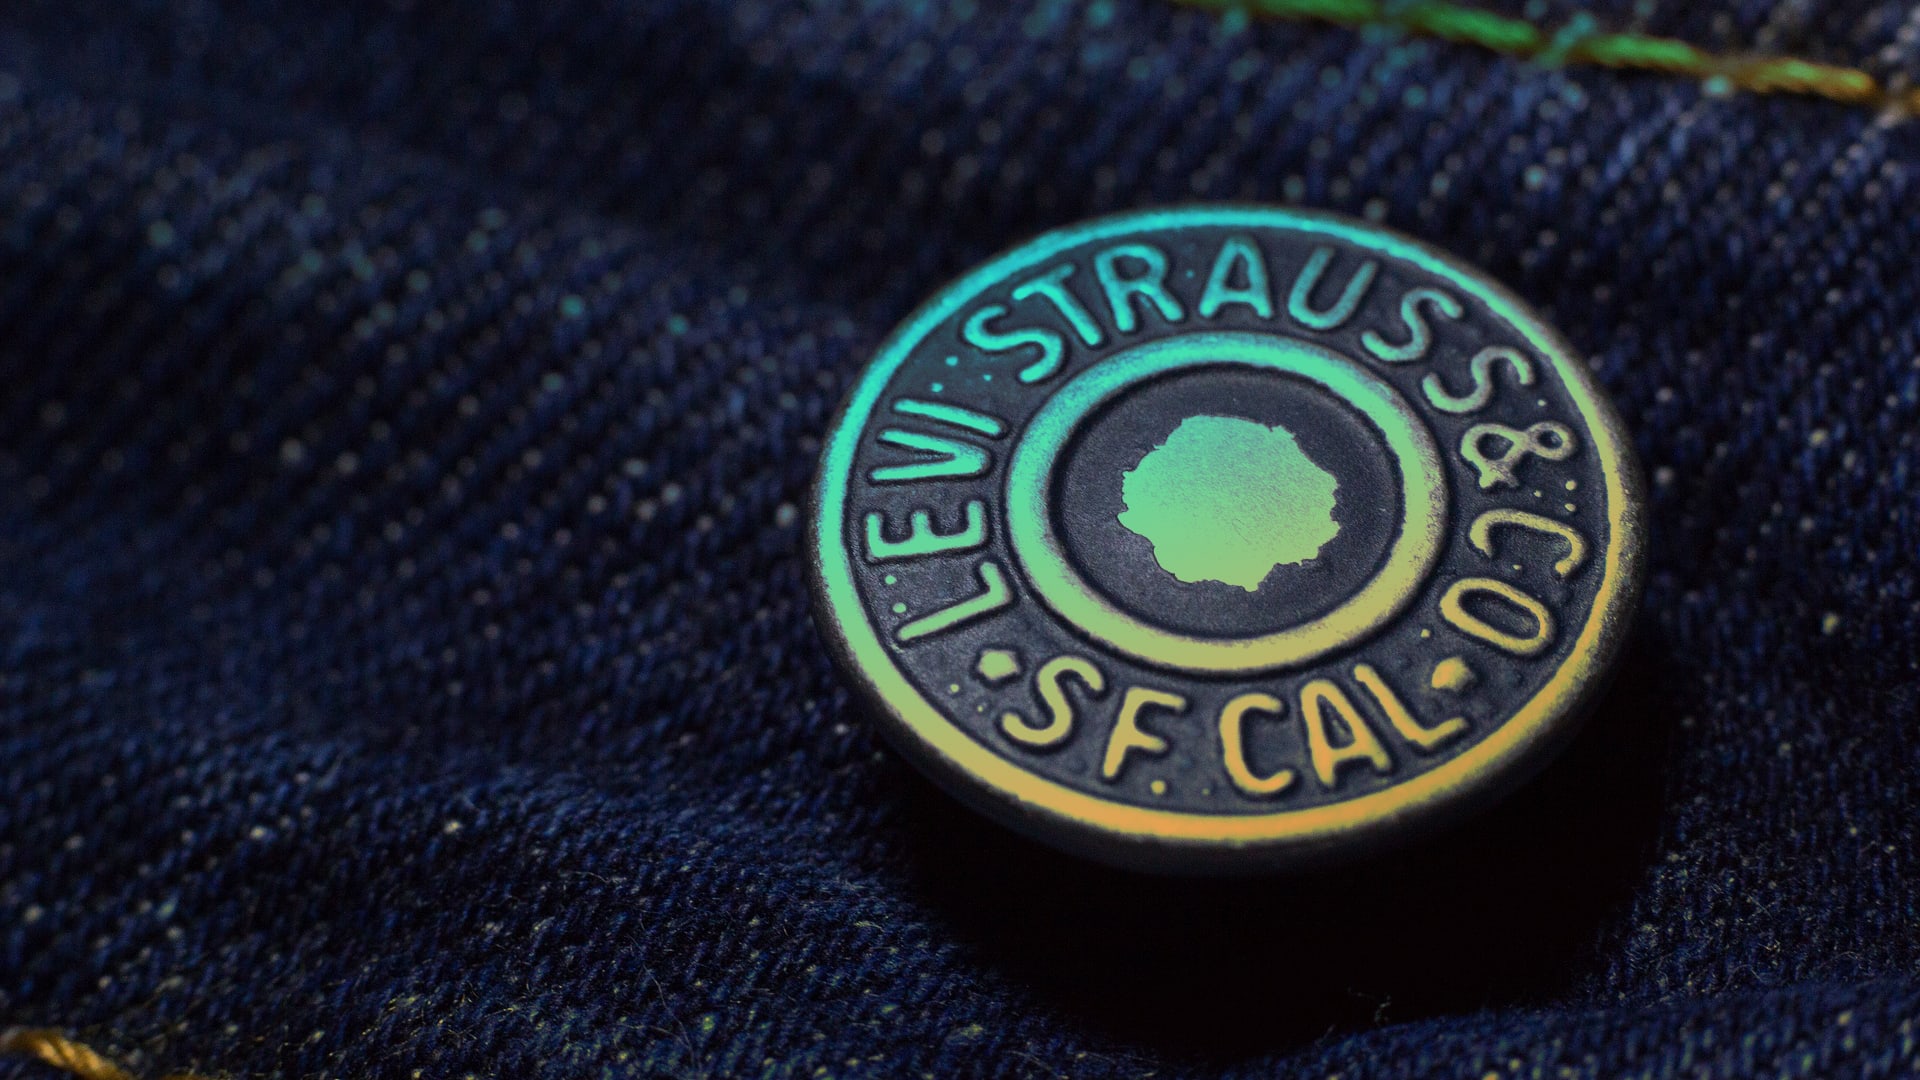 Welcome, LEVI: Denim giant Levi Strauss readies NYSE debut